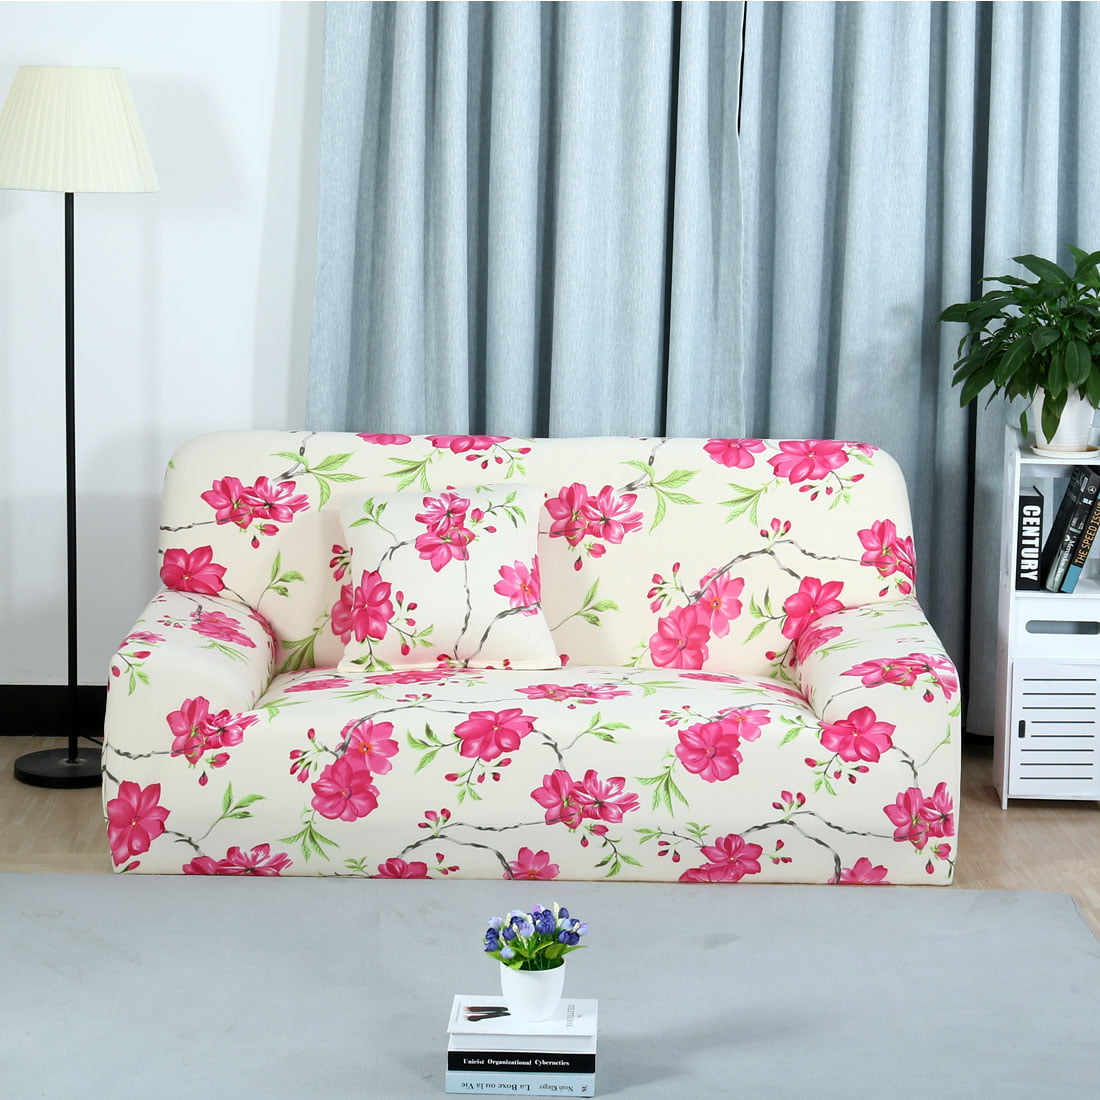 Details about   1-3 Seats Sofa Seat Cushion Covers Stretch Slipcovers Couch Furniture Protectors 